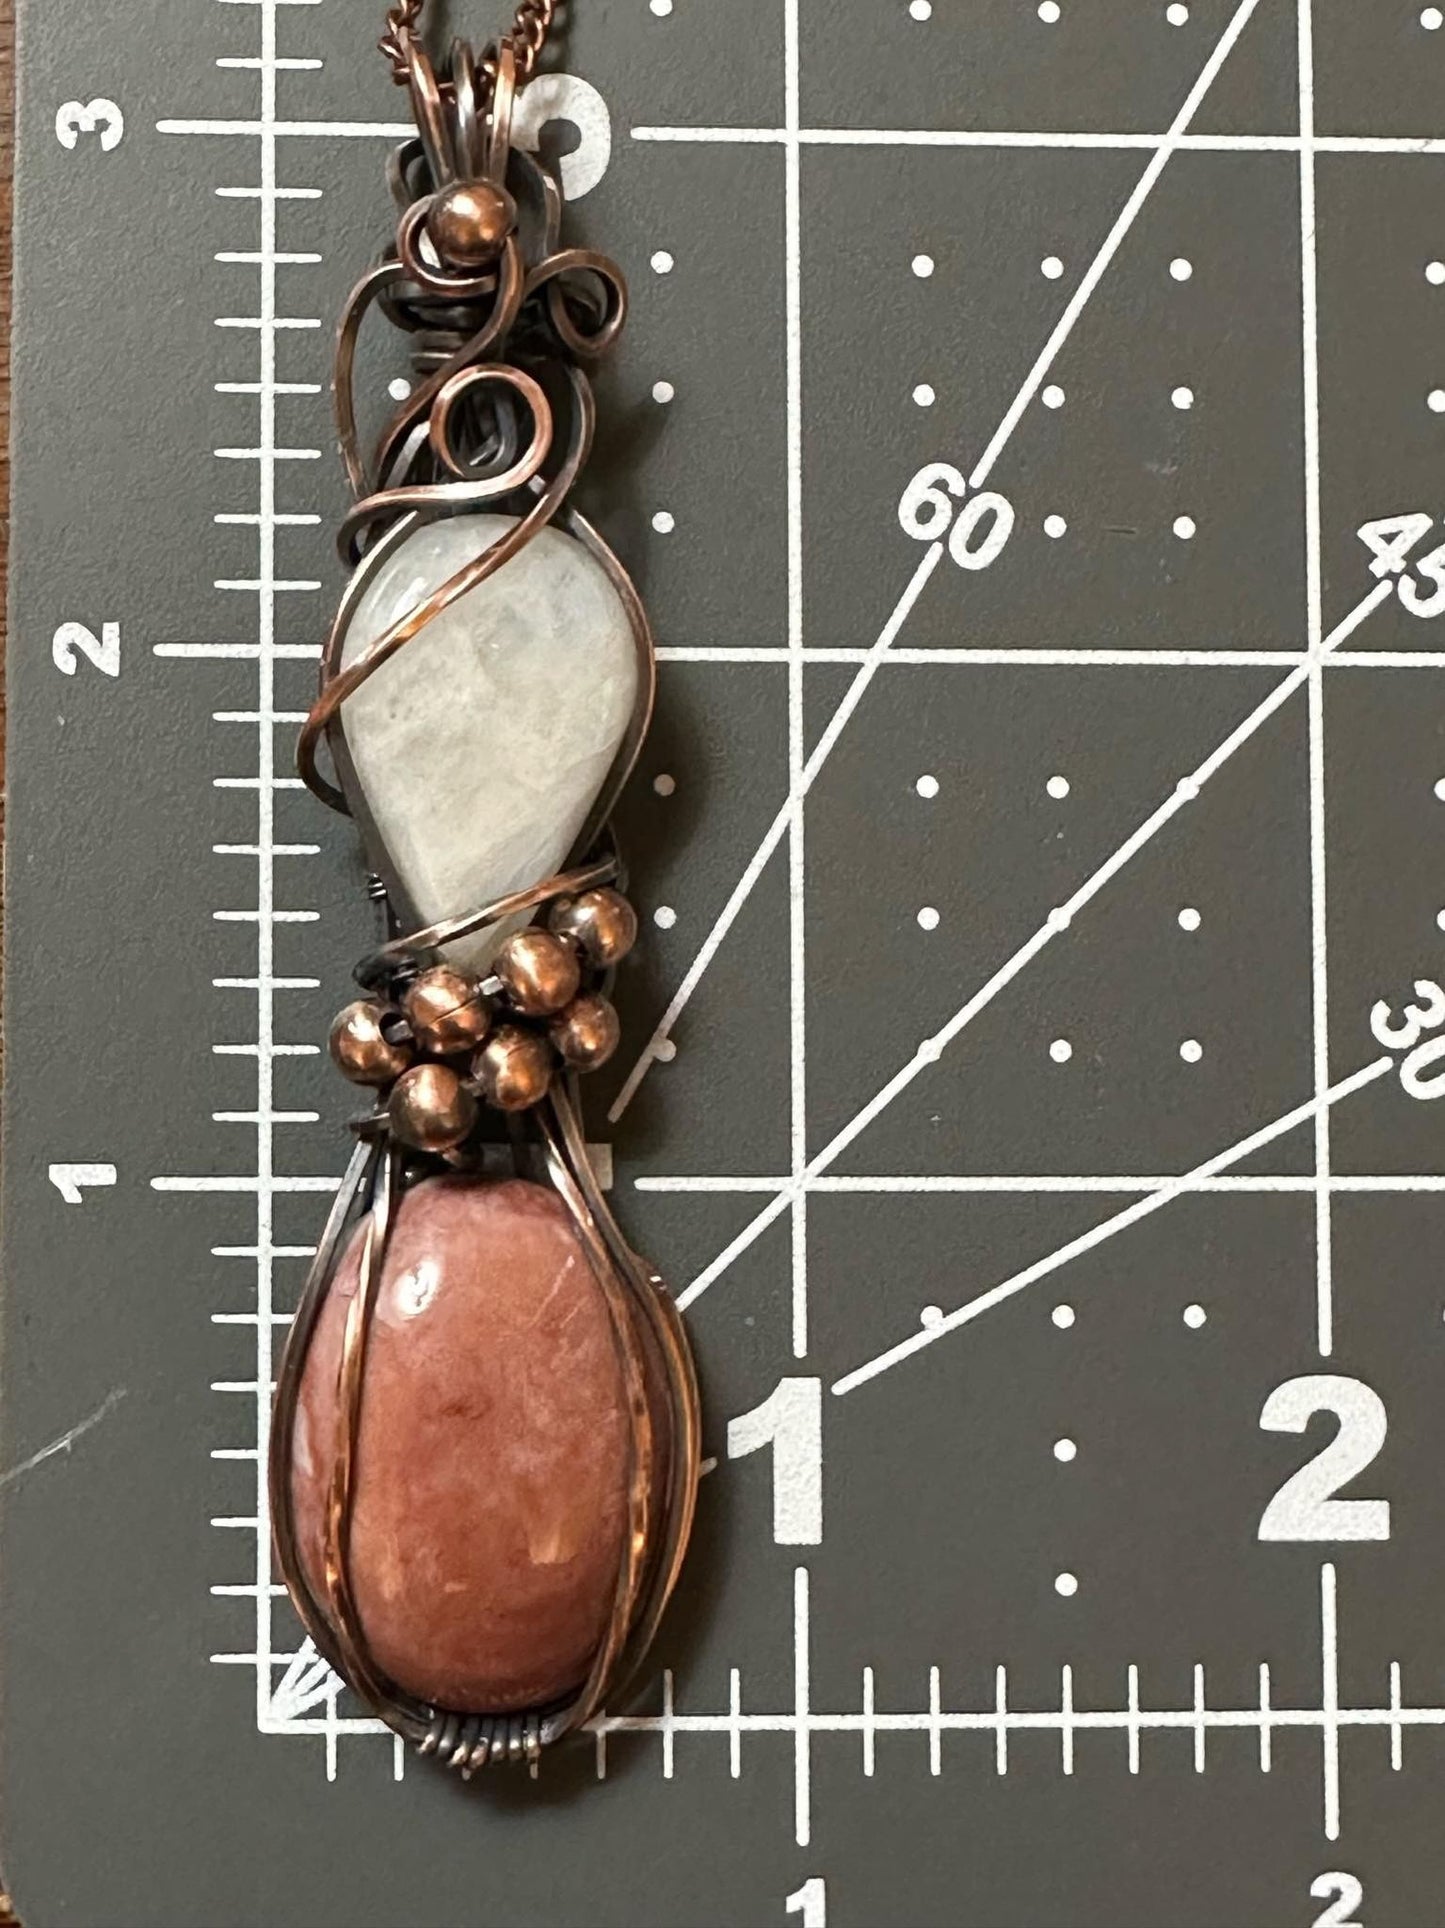 Imperial Jasper Oval And Moonstone Teardrop Double Handmade Wire Wrapped Pendant